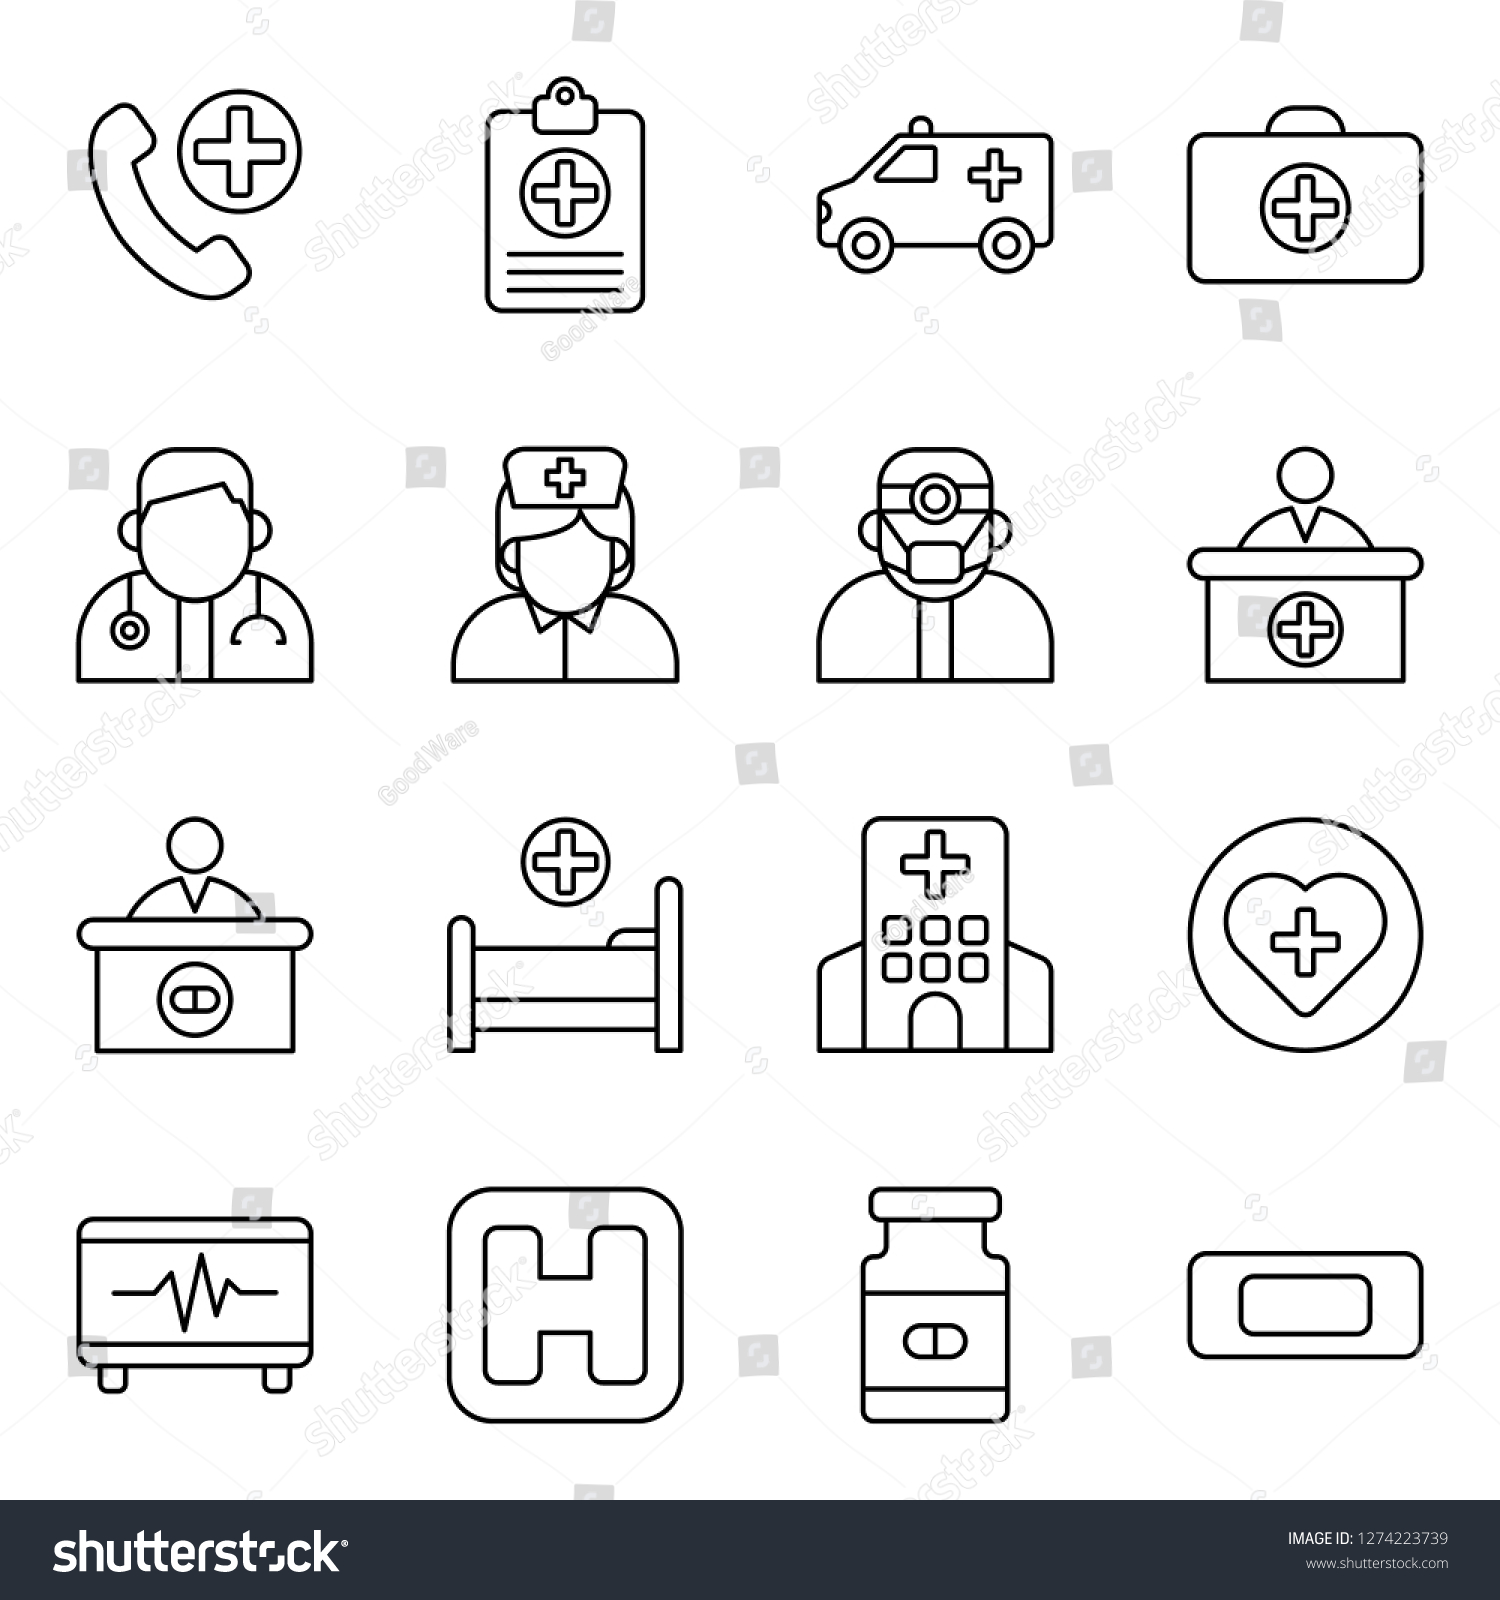 Medical and medical staff icons pack. Isolated medical and medical staff symbols collection. Graphic icons element #1274223739